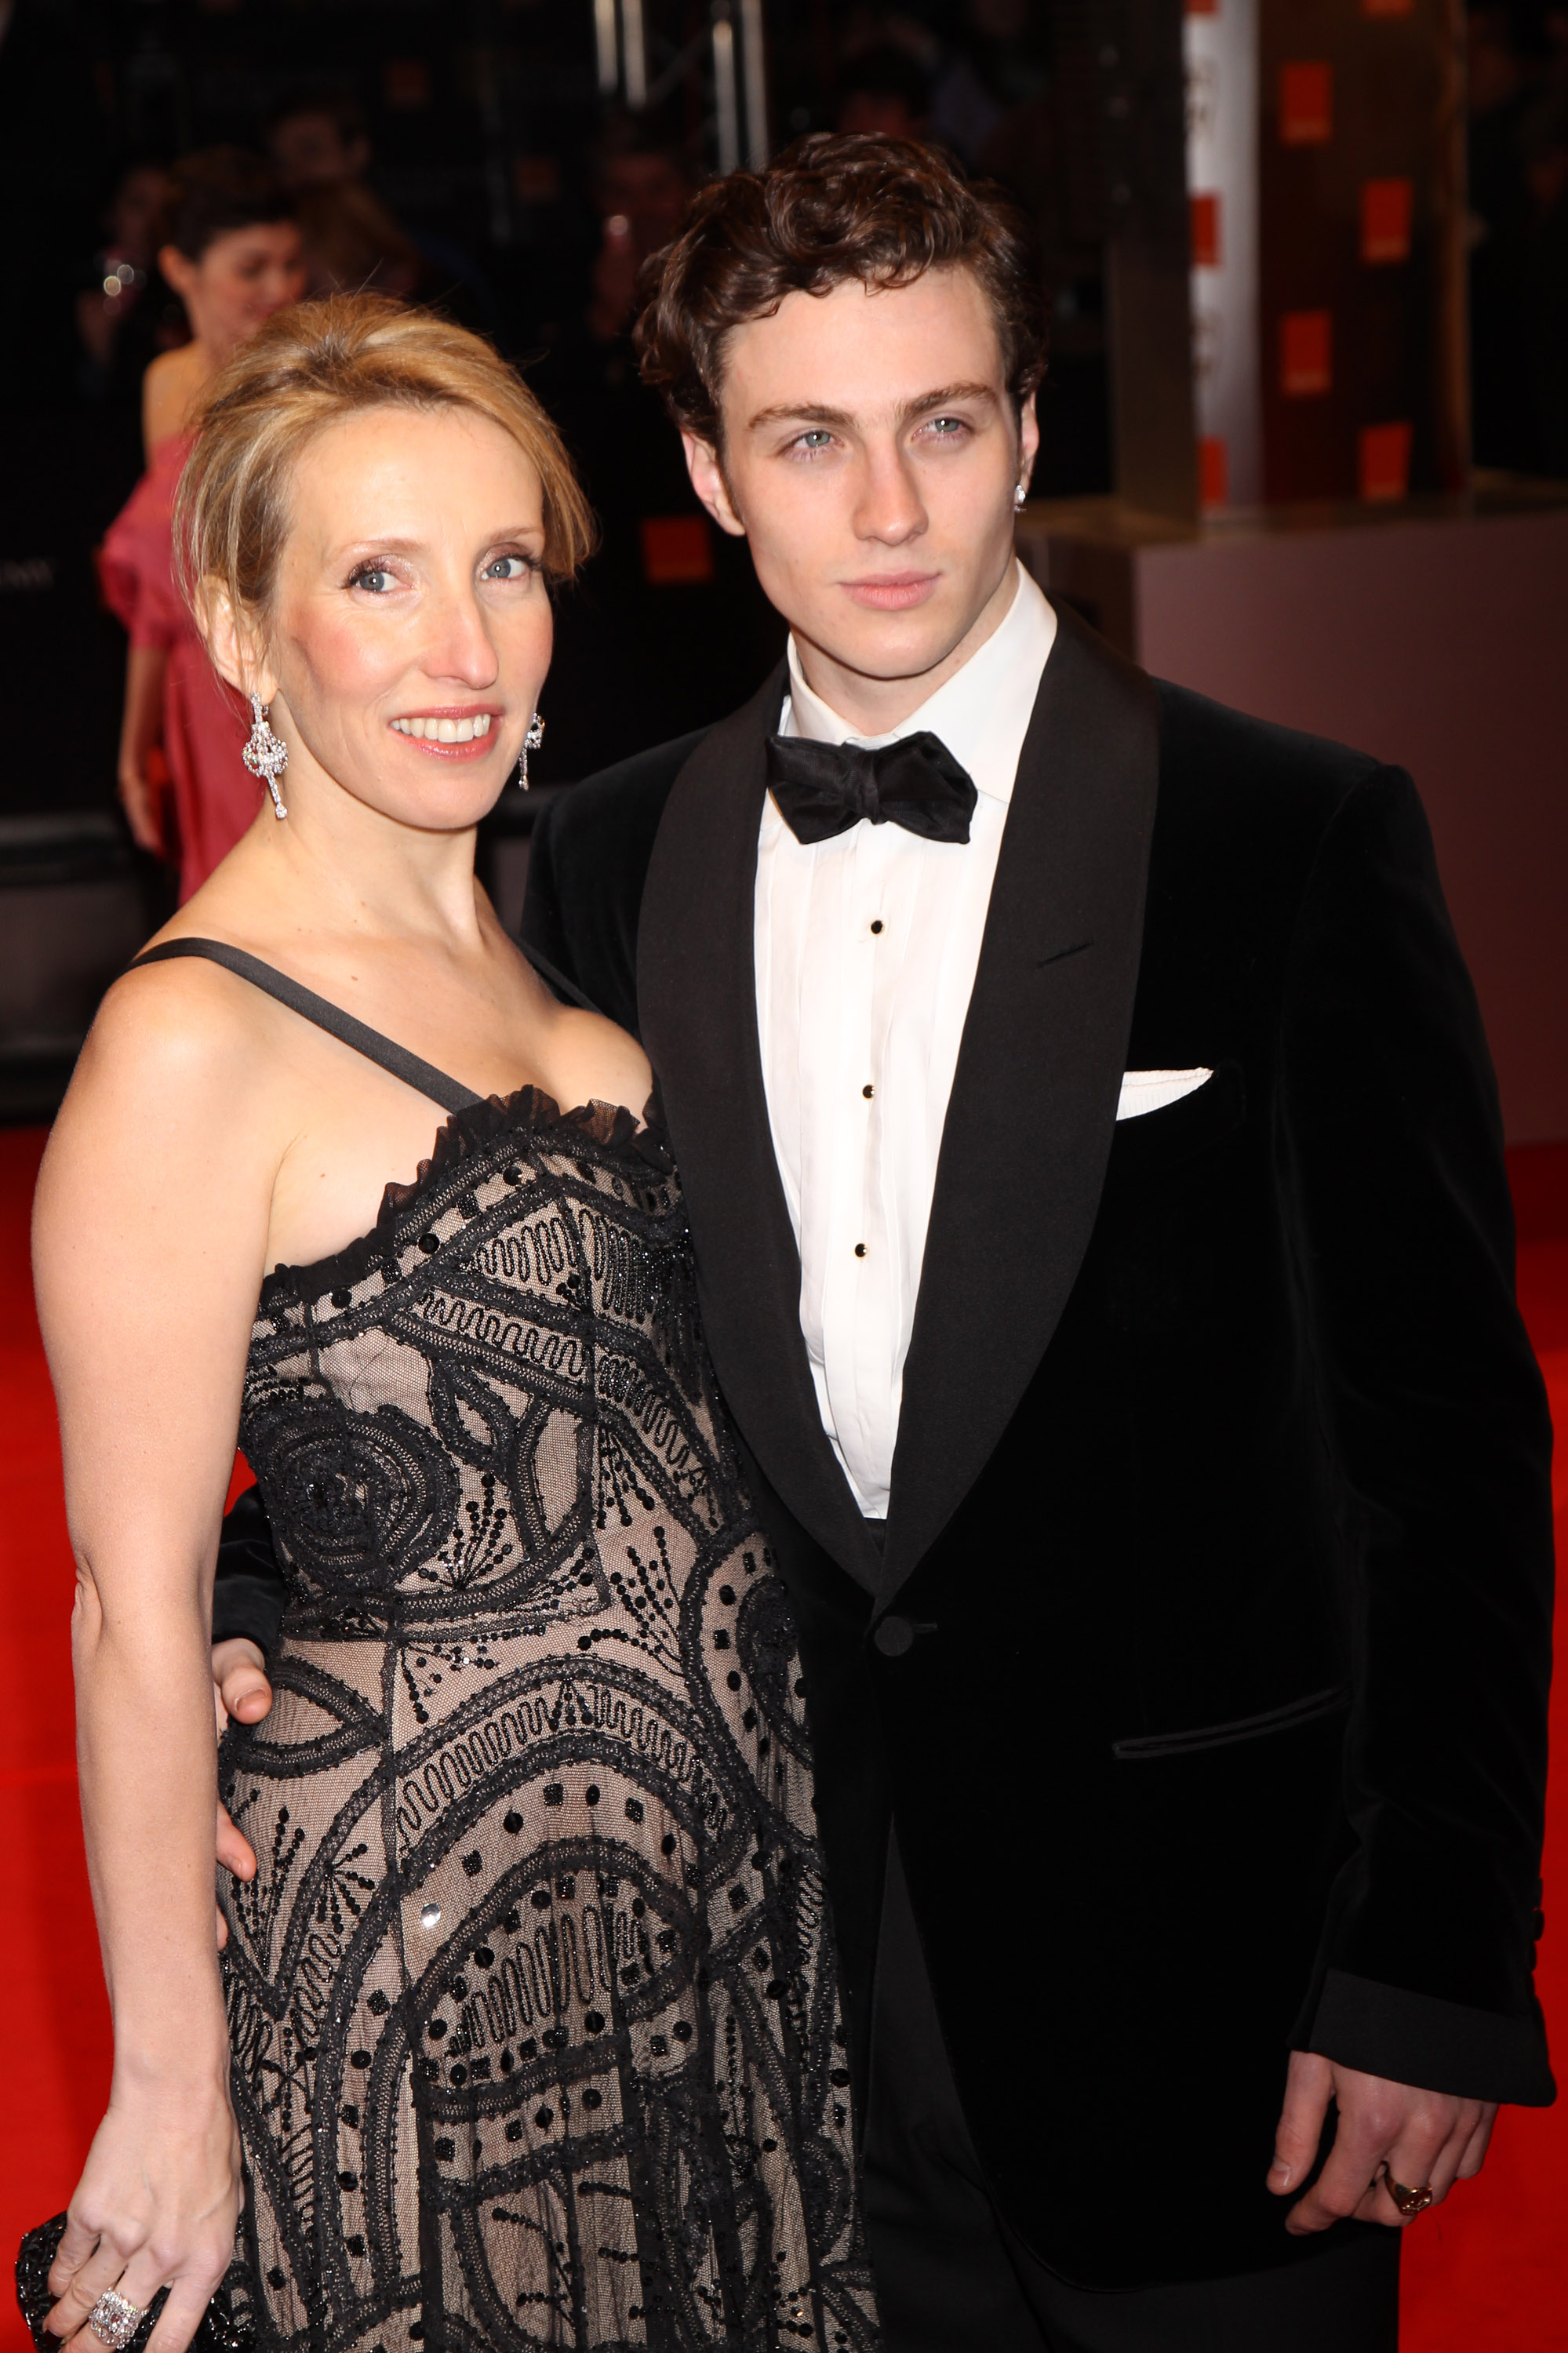 Sam and Aaron Taylor-Johnson at British Academy Film Awards in London in 2010 | Source: Getty Images